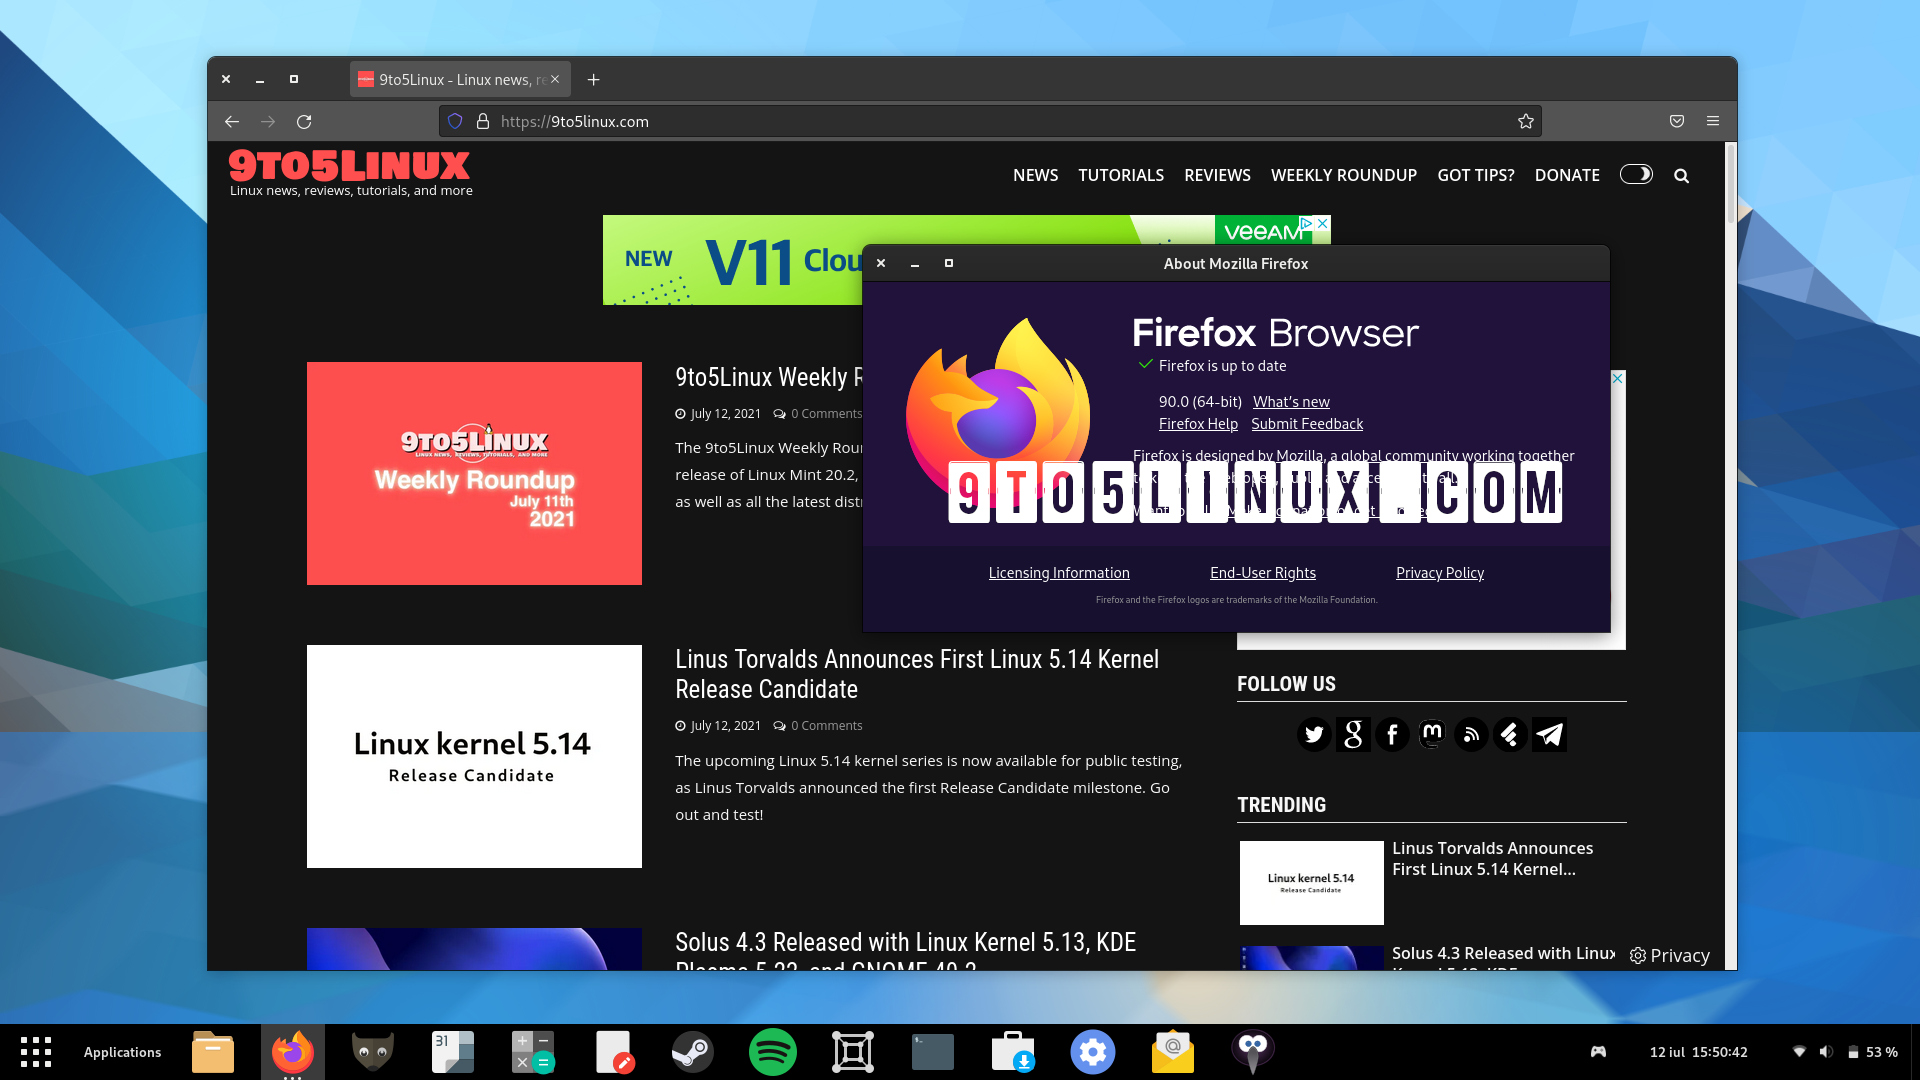 Mozilla Firefox 90 Is Now Available for Download, Removes Built-In FTP Support